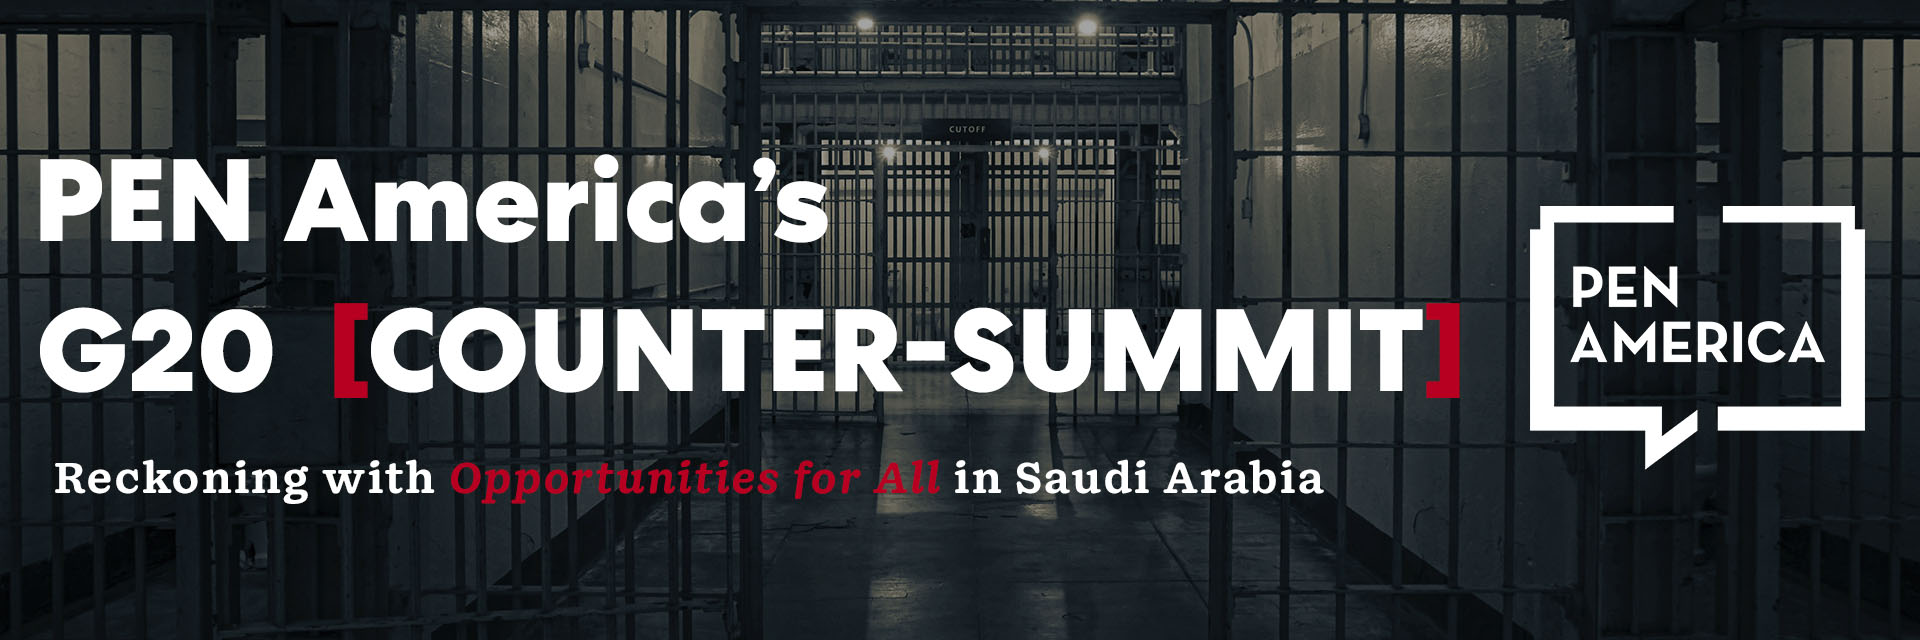 Jail cell in background; on top, text that reads “PEN America’s G20 Counter-Summit: Reckoning with Opportunities for All in Saudi Arabia” and logo of PEN America